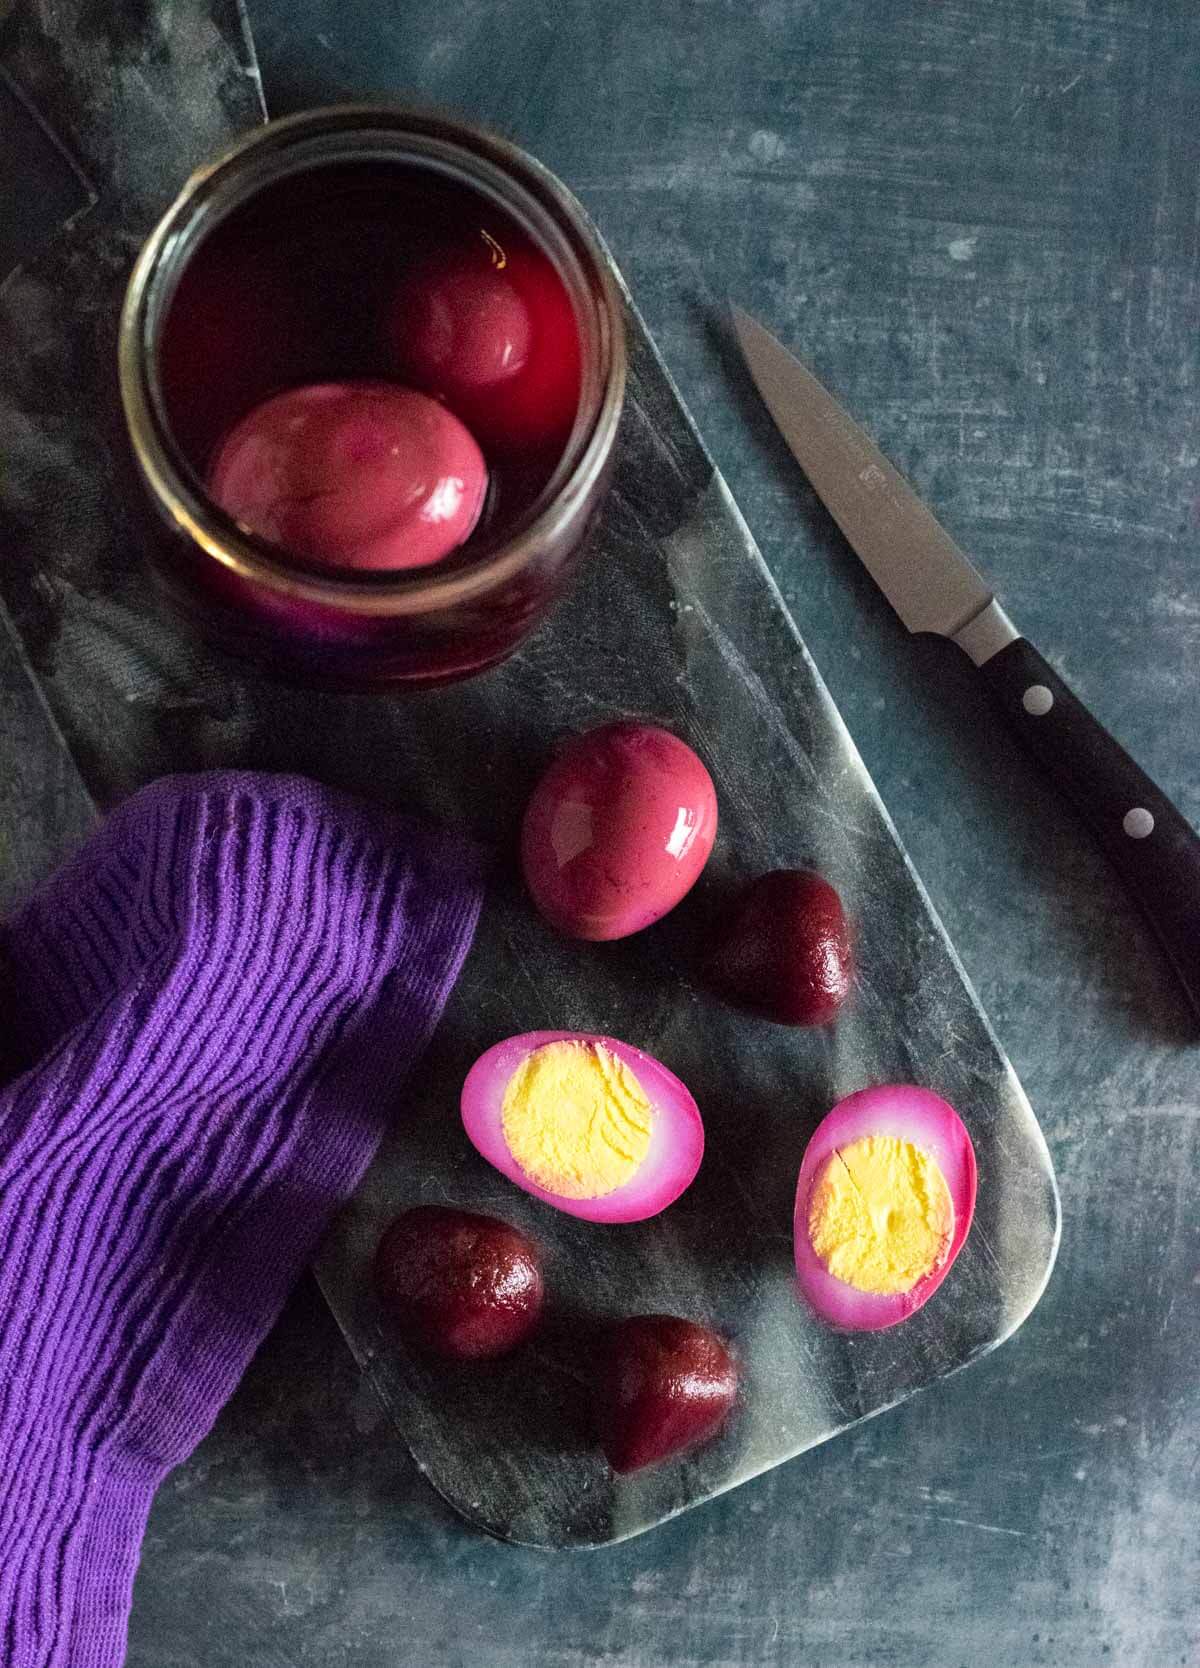 Pickled eggs with beets.